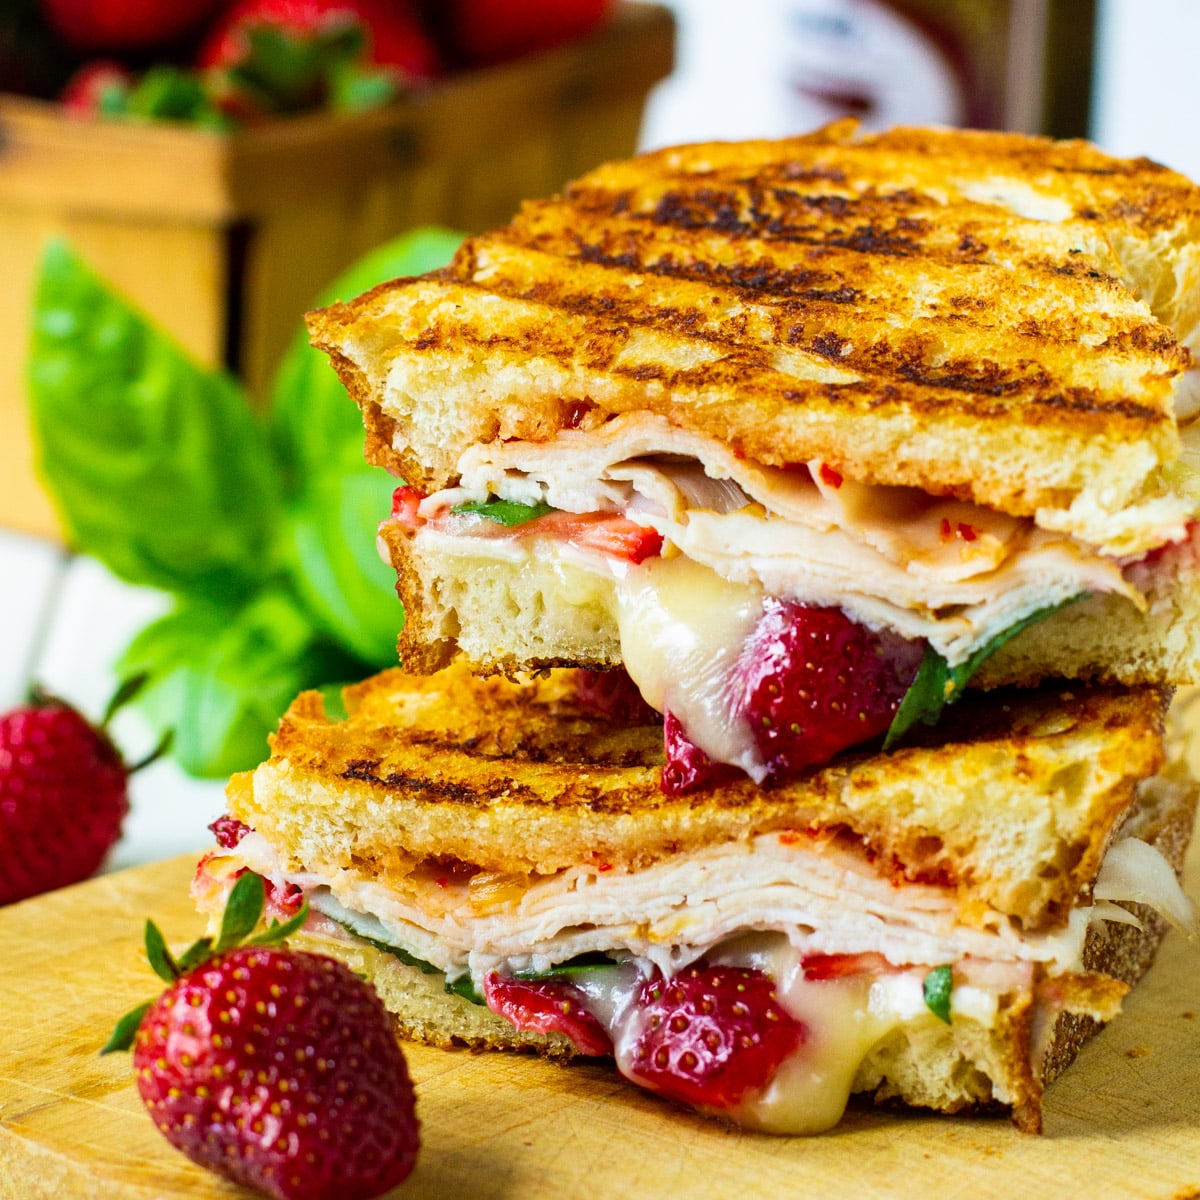 Strawberry, Brie, and Turkey Panini cut in half and stacked.